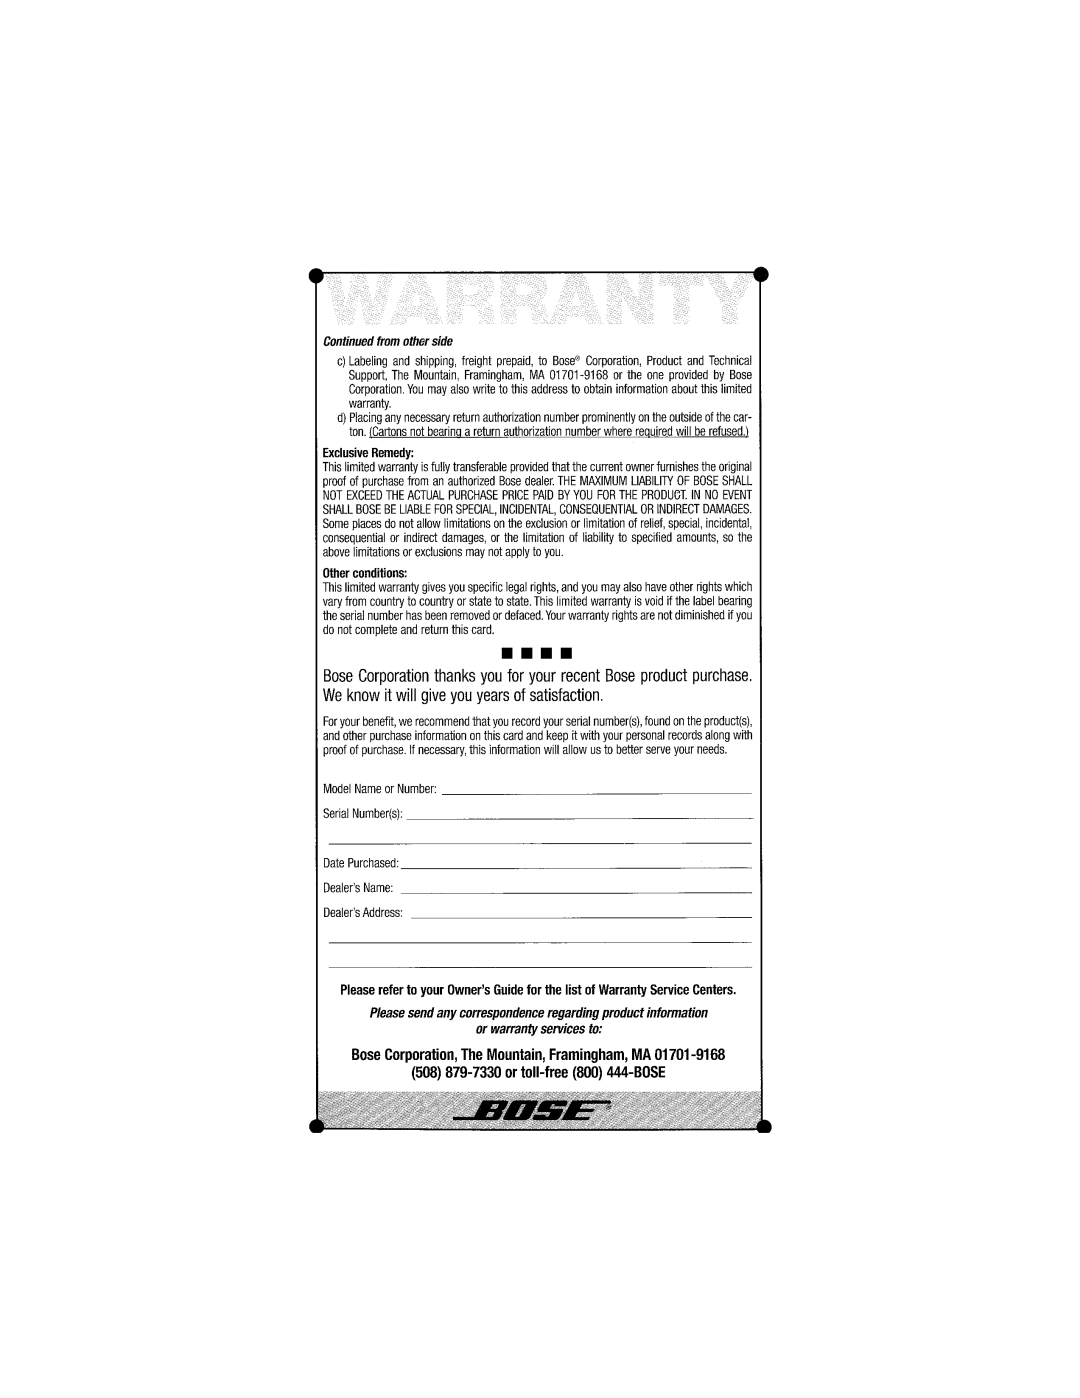 Bose SA-3 or warranty services to, Bose Corporation, The Mountain, Framingham, MA, 508 879-7330or toll-free800 444-BOSE 